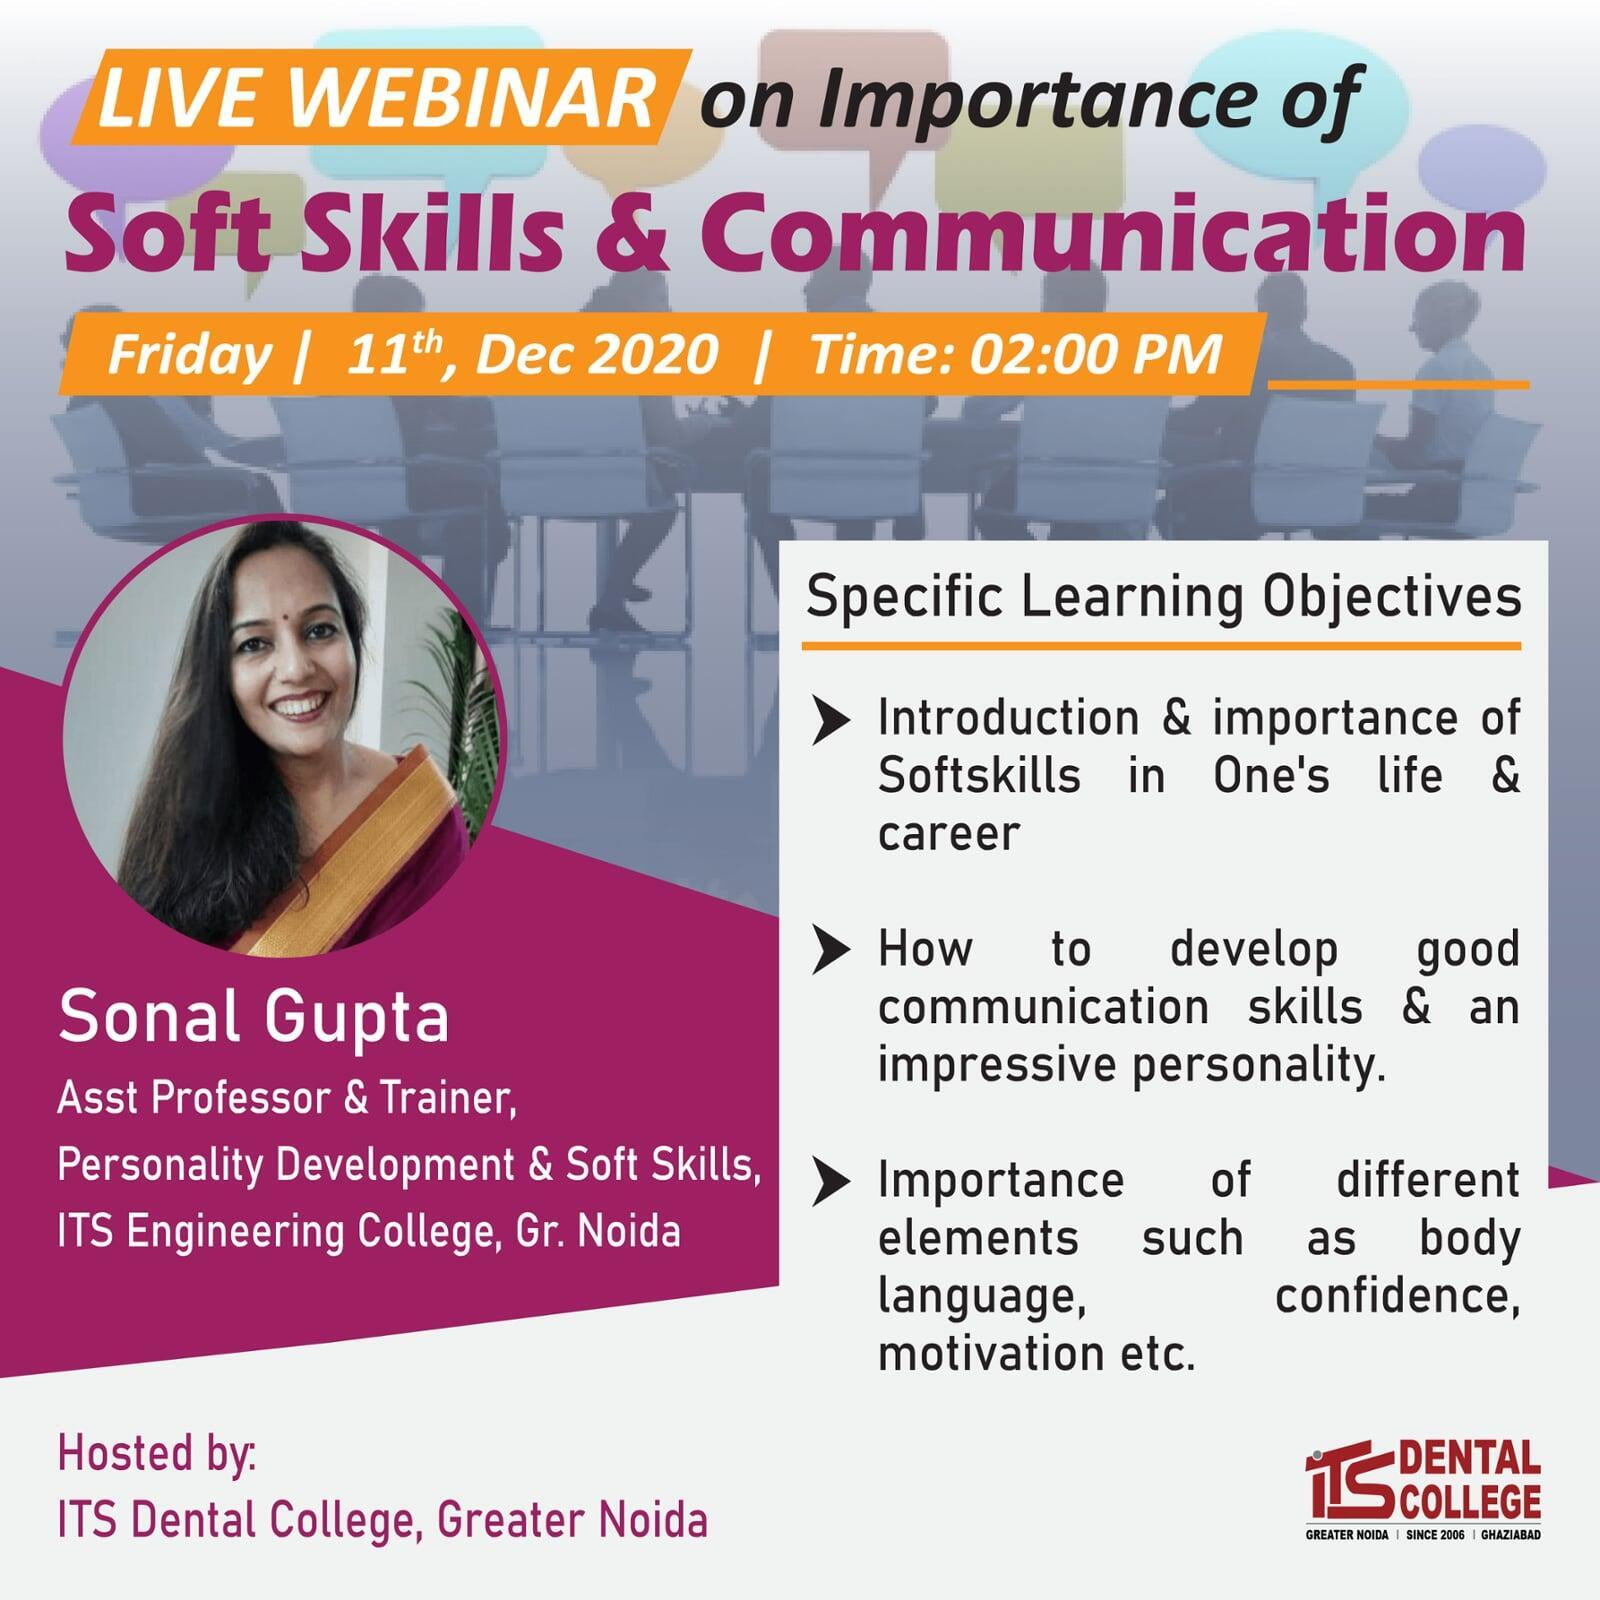 Live Webinar on the topic "Importance of Soft skills and communication" on 11th Dec. 2020